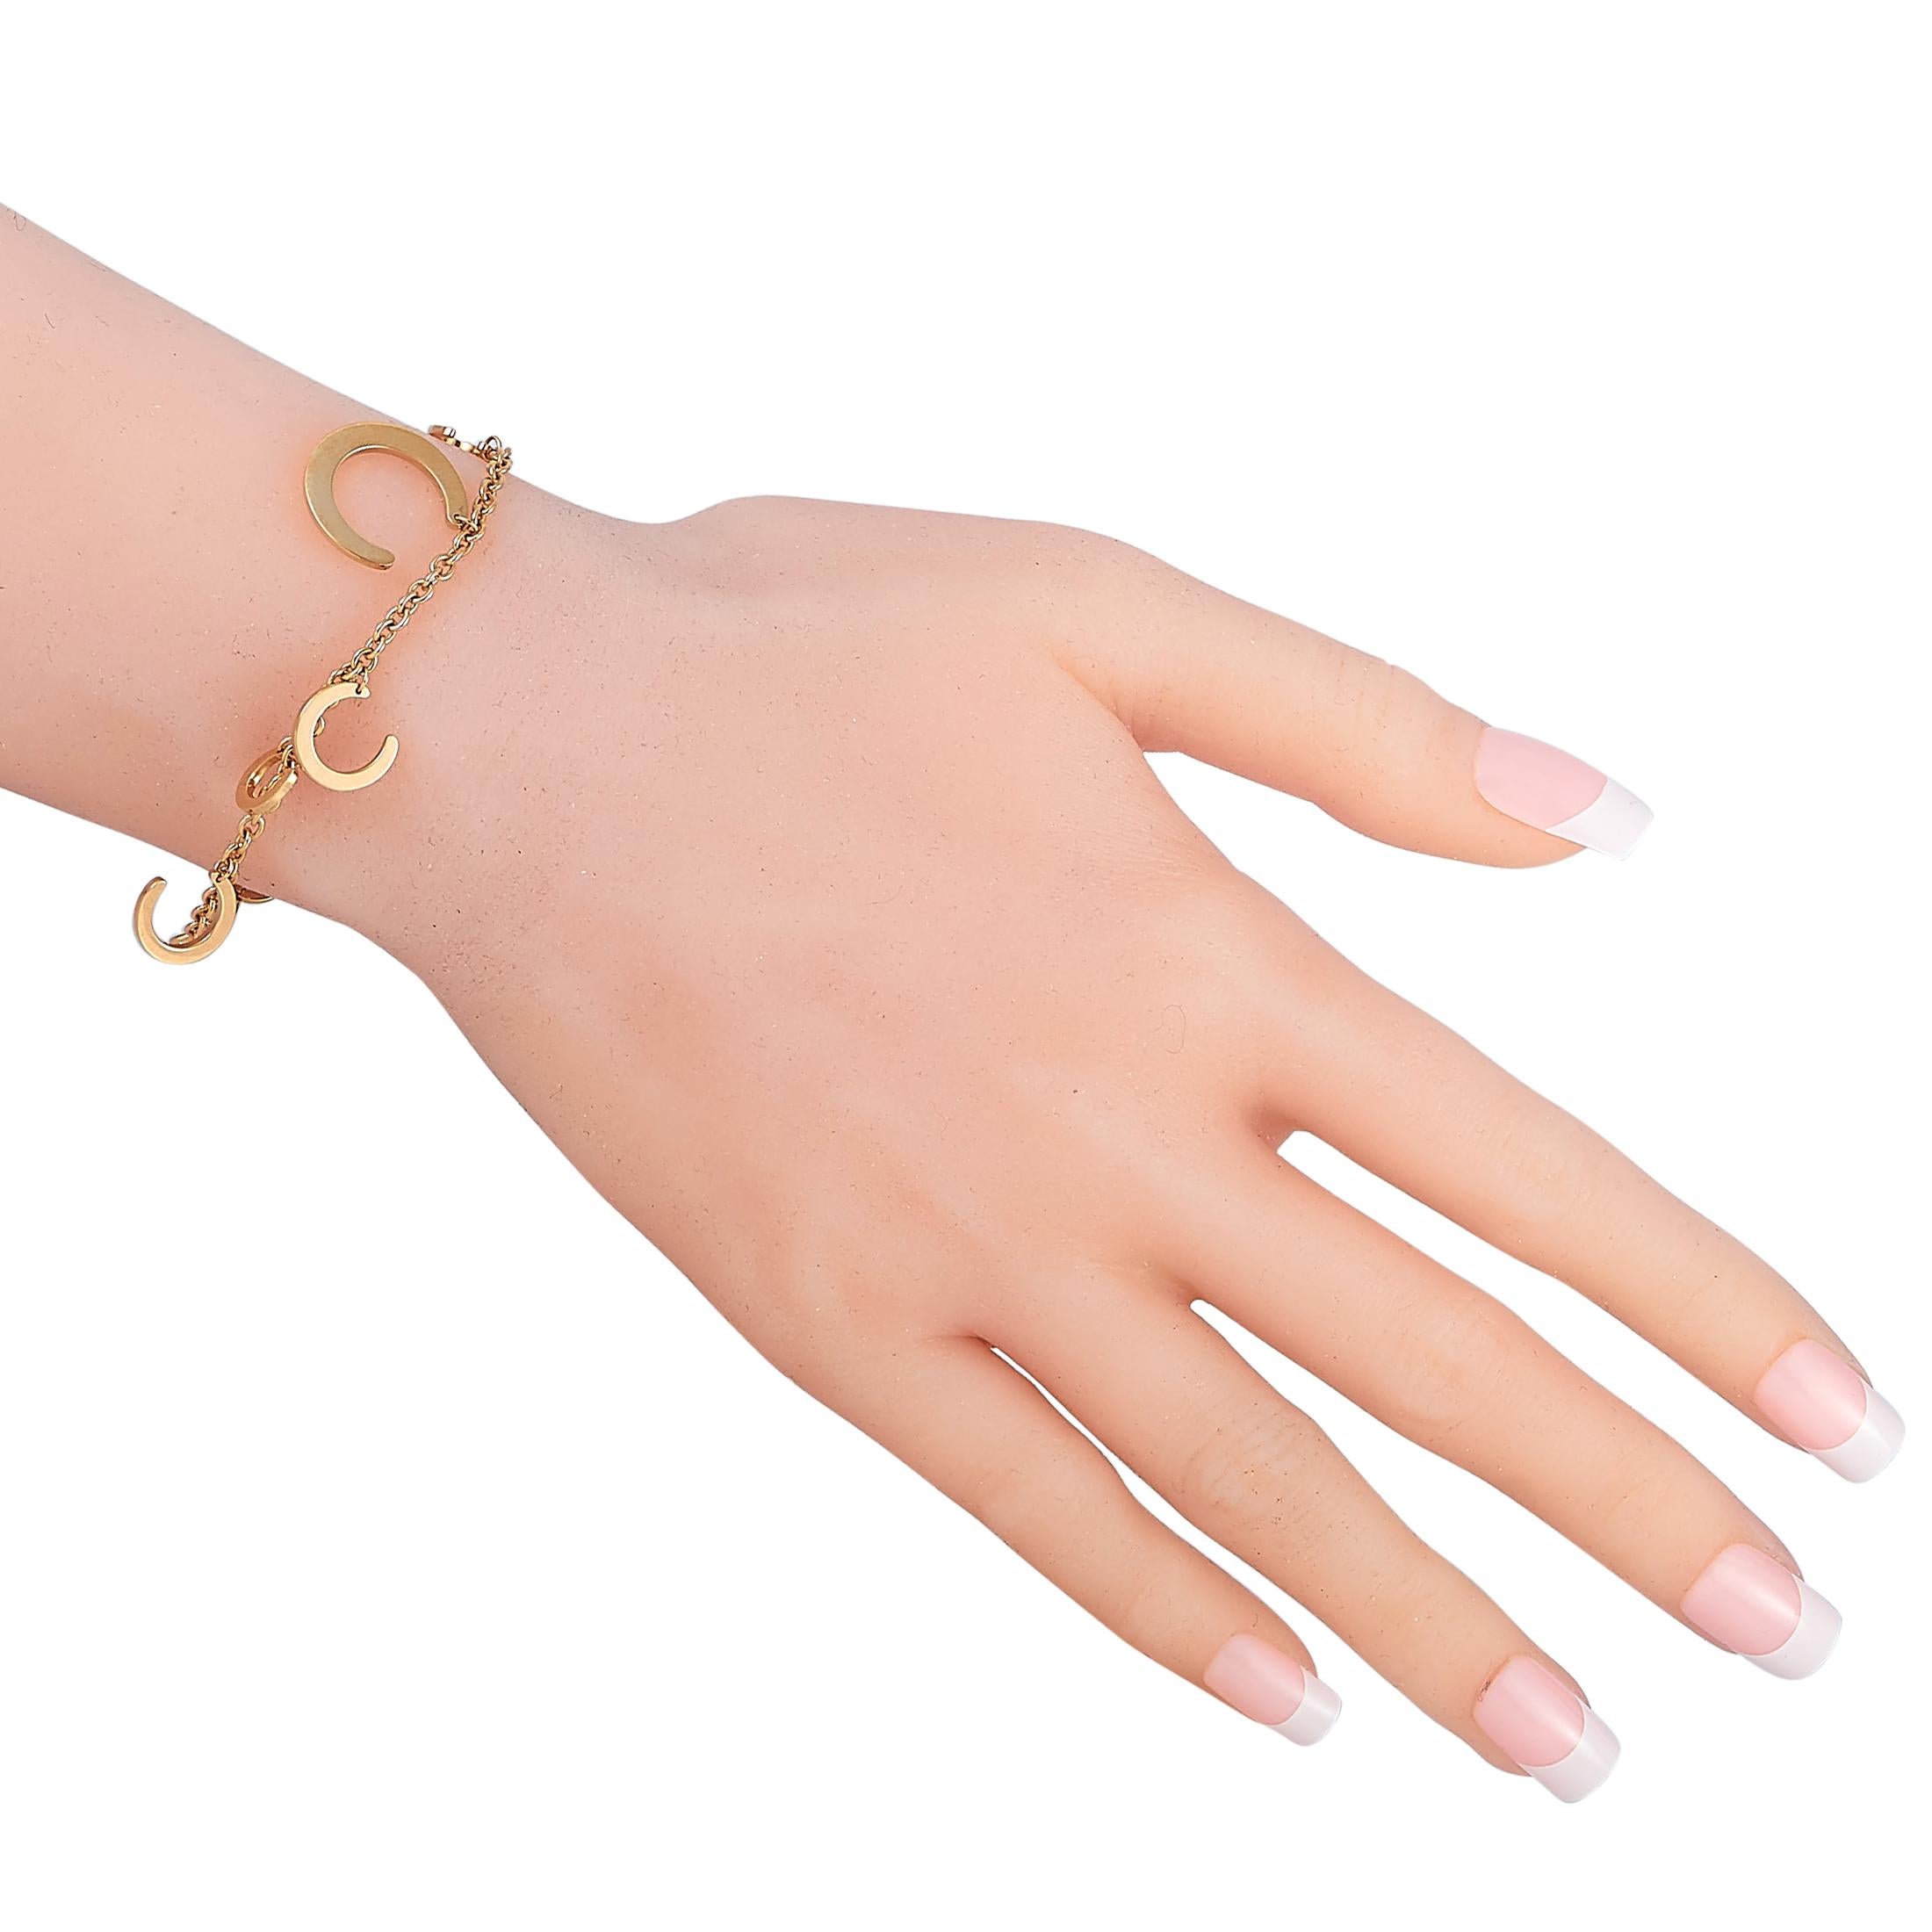 This Ubaldi bracelet with horseshoe charms is made of 18K rose gold and embellished with diamonds that amount to 0.40 carats. The bracelet weighs 12.2 grams and measures 7” in length.

Offered in brand new condition, this jewelry piece includes a